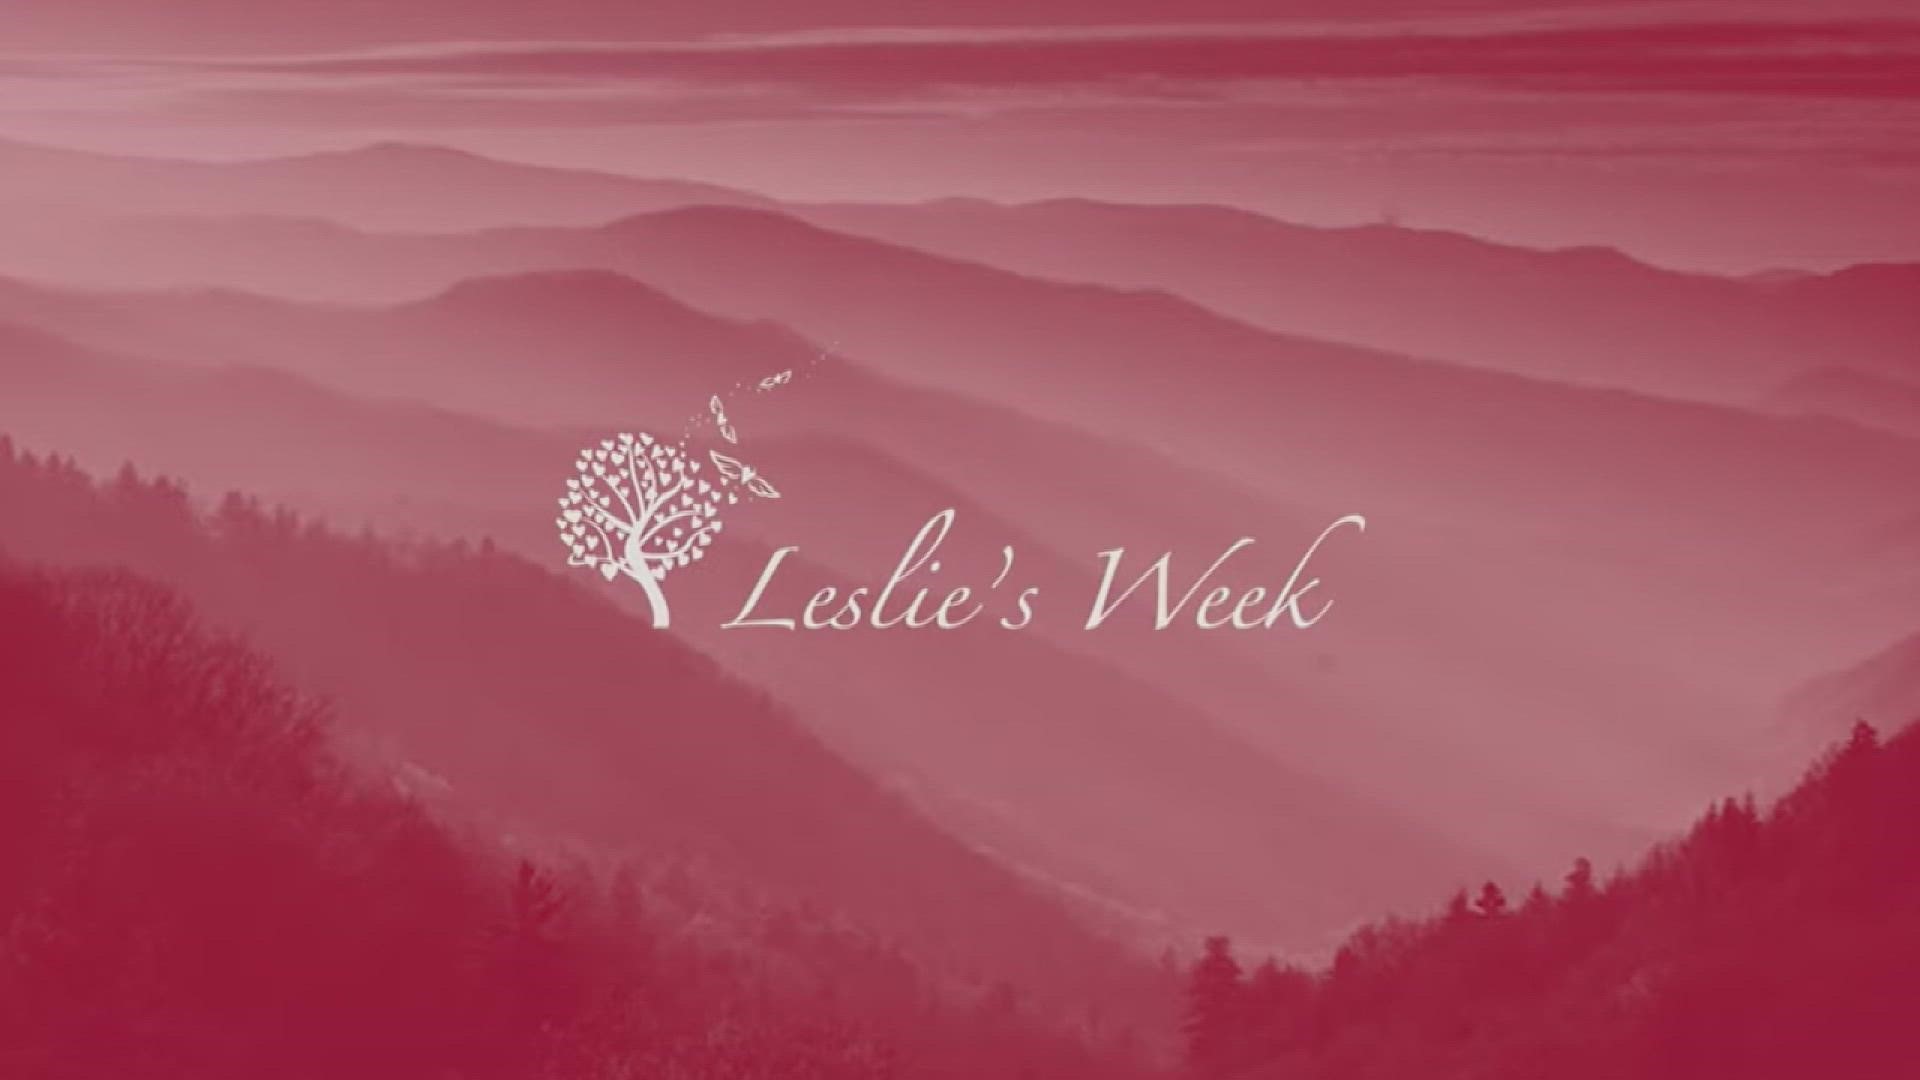 Leslie Week is offering a week away from breast cancer and for women battling with the disease means everything.